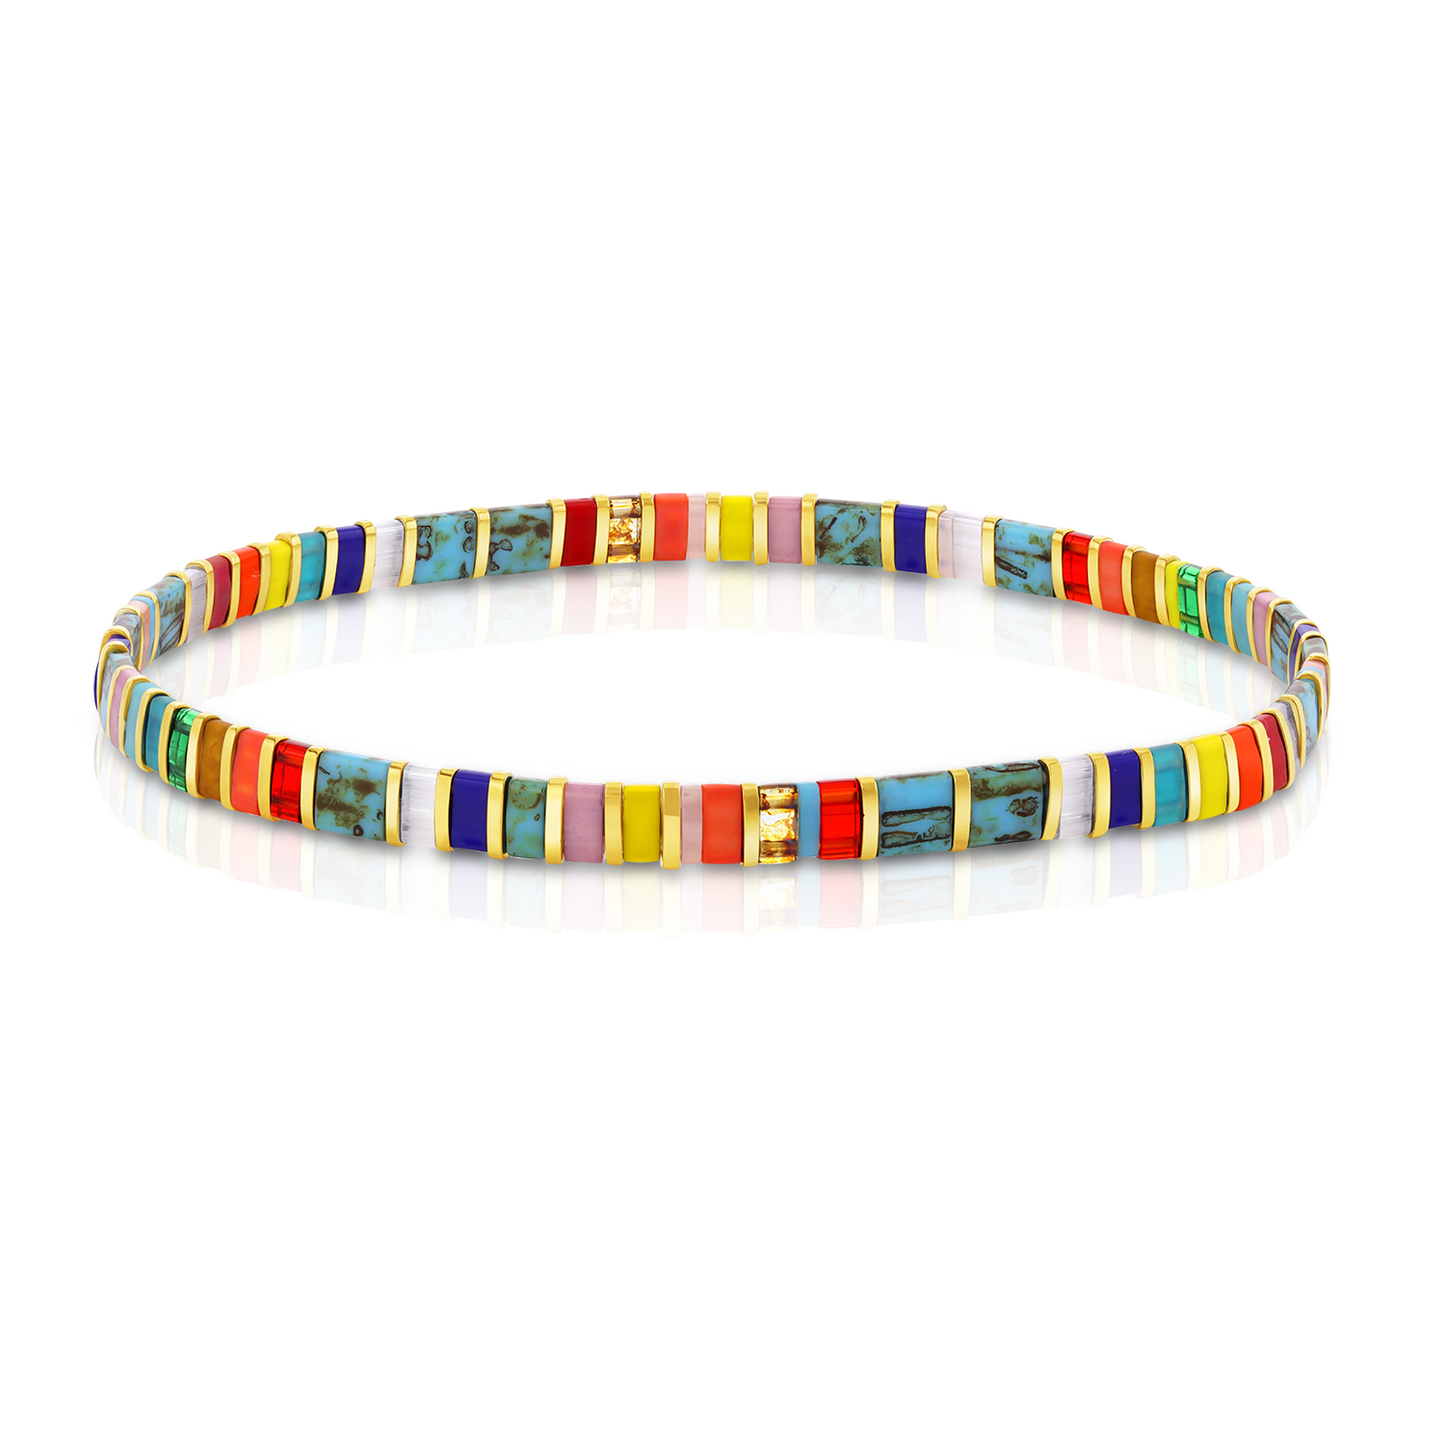 Colored tila beads stretch handmade ankle bracelets made by Born to Rock Jewelry. Surf and sports inspired jewelry brand. A family-owned business that rocks! Based in San Diego California.